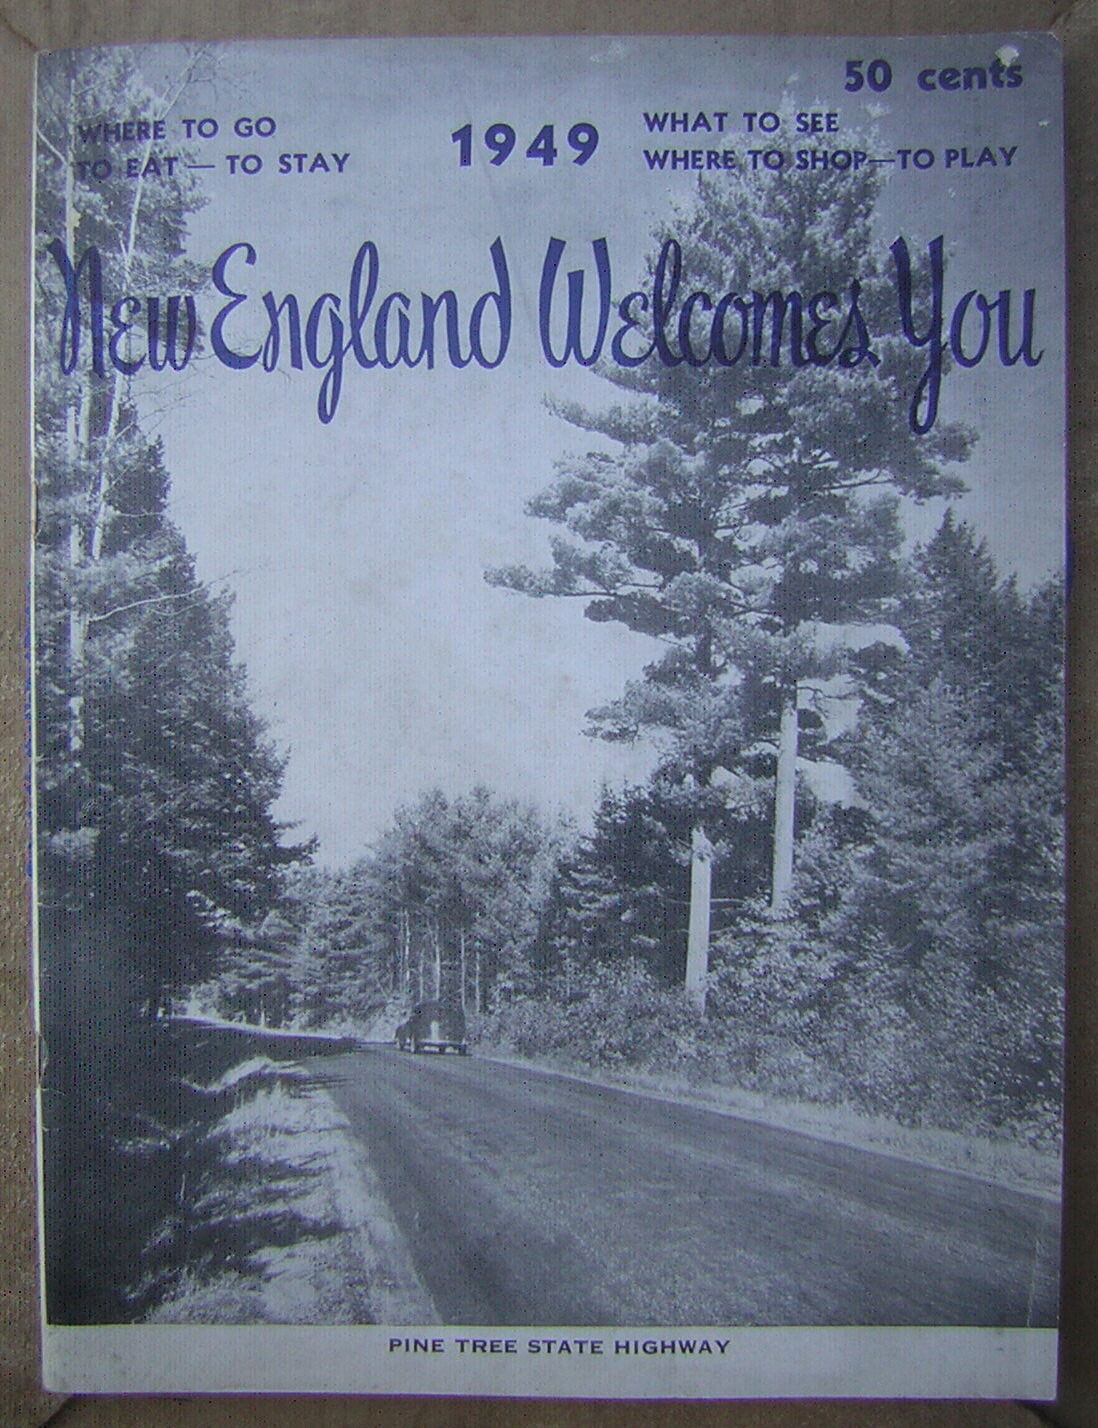 1949 New England Welcomes You Travel Magazine with Pine Tree State Highway Cover